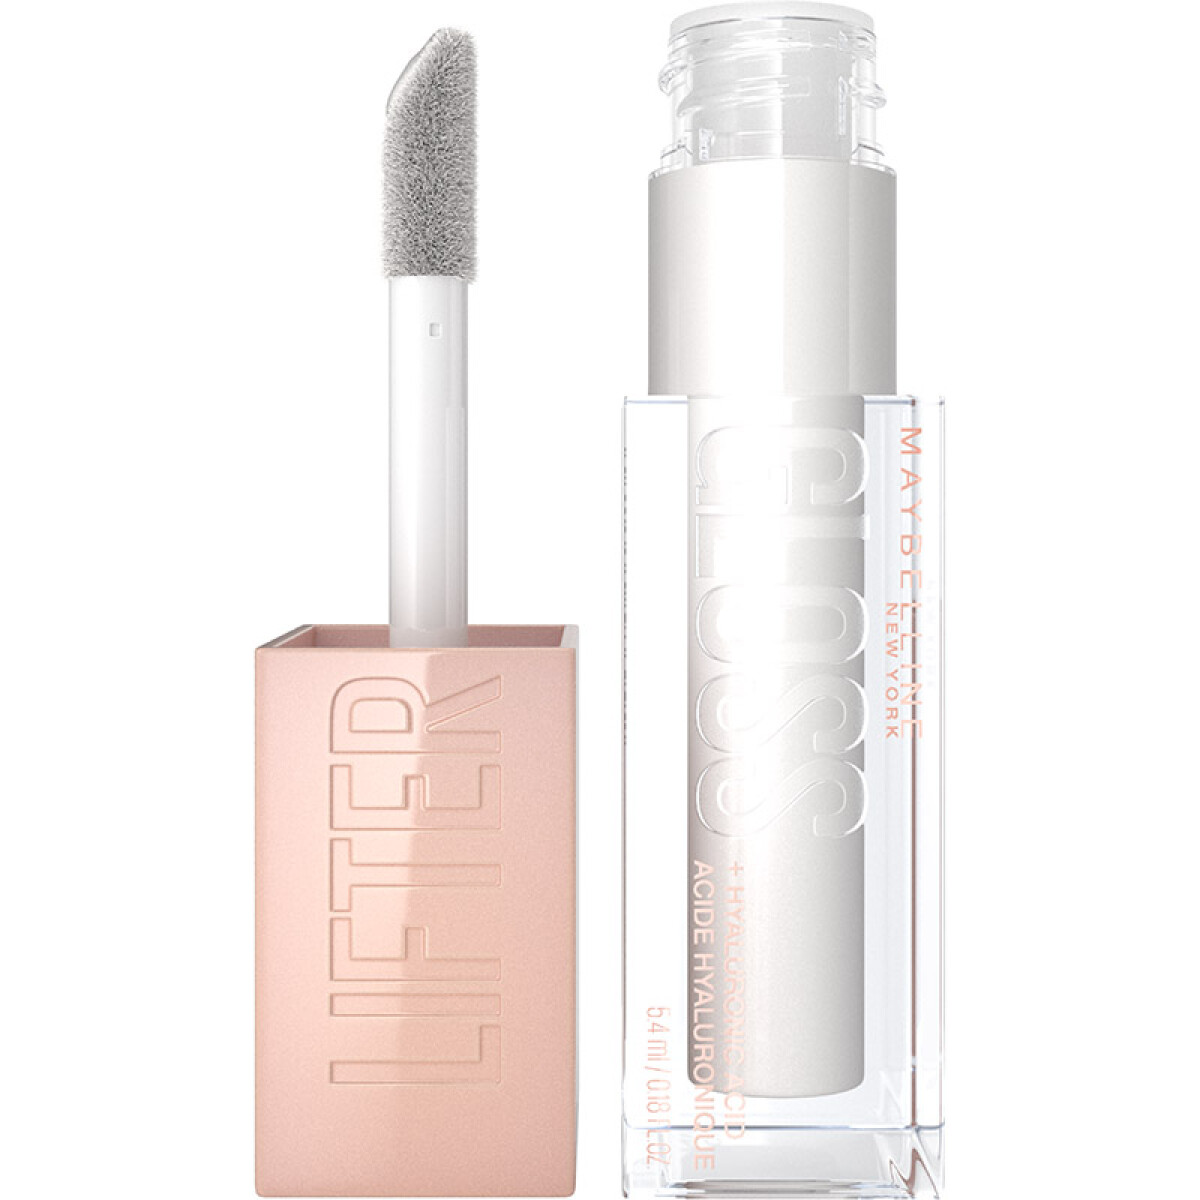 Maybelline gloss lifter - 001 